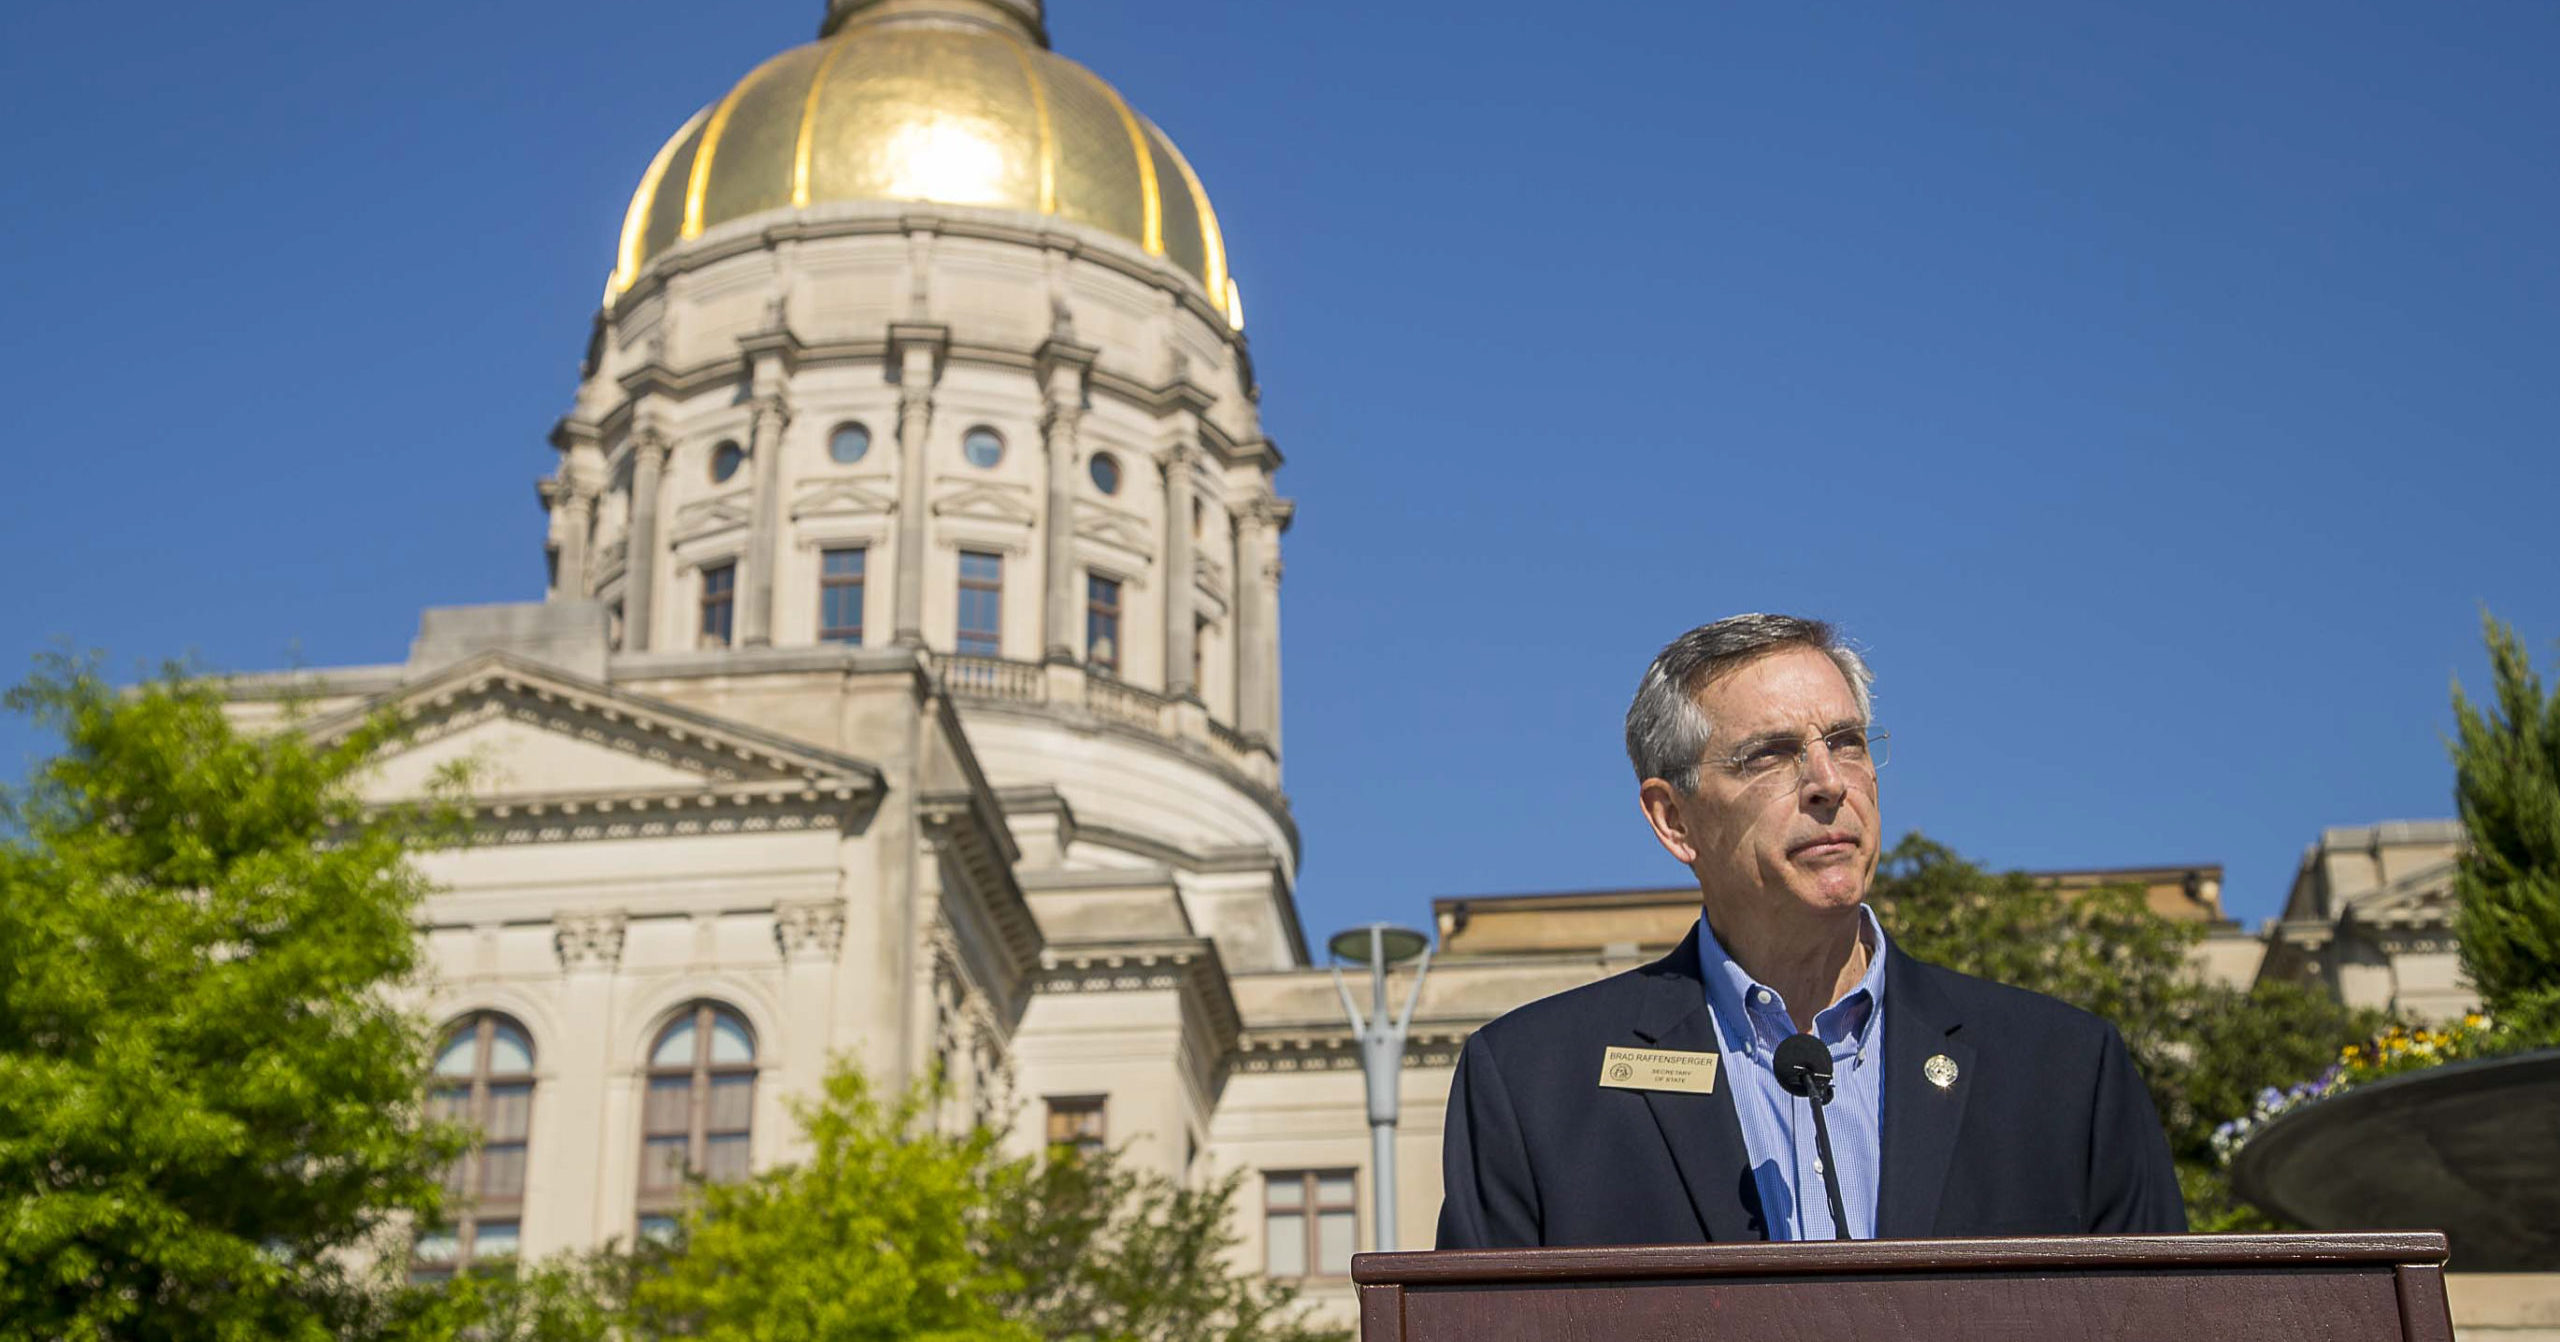 Georgia Secretary of State Brad Raffensperger speaks during a news conference across the street from the Georgia State Capitol in downtown Atlanta on April 6, 2020.